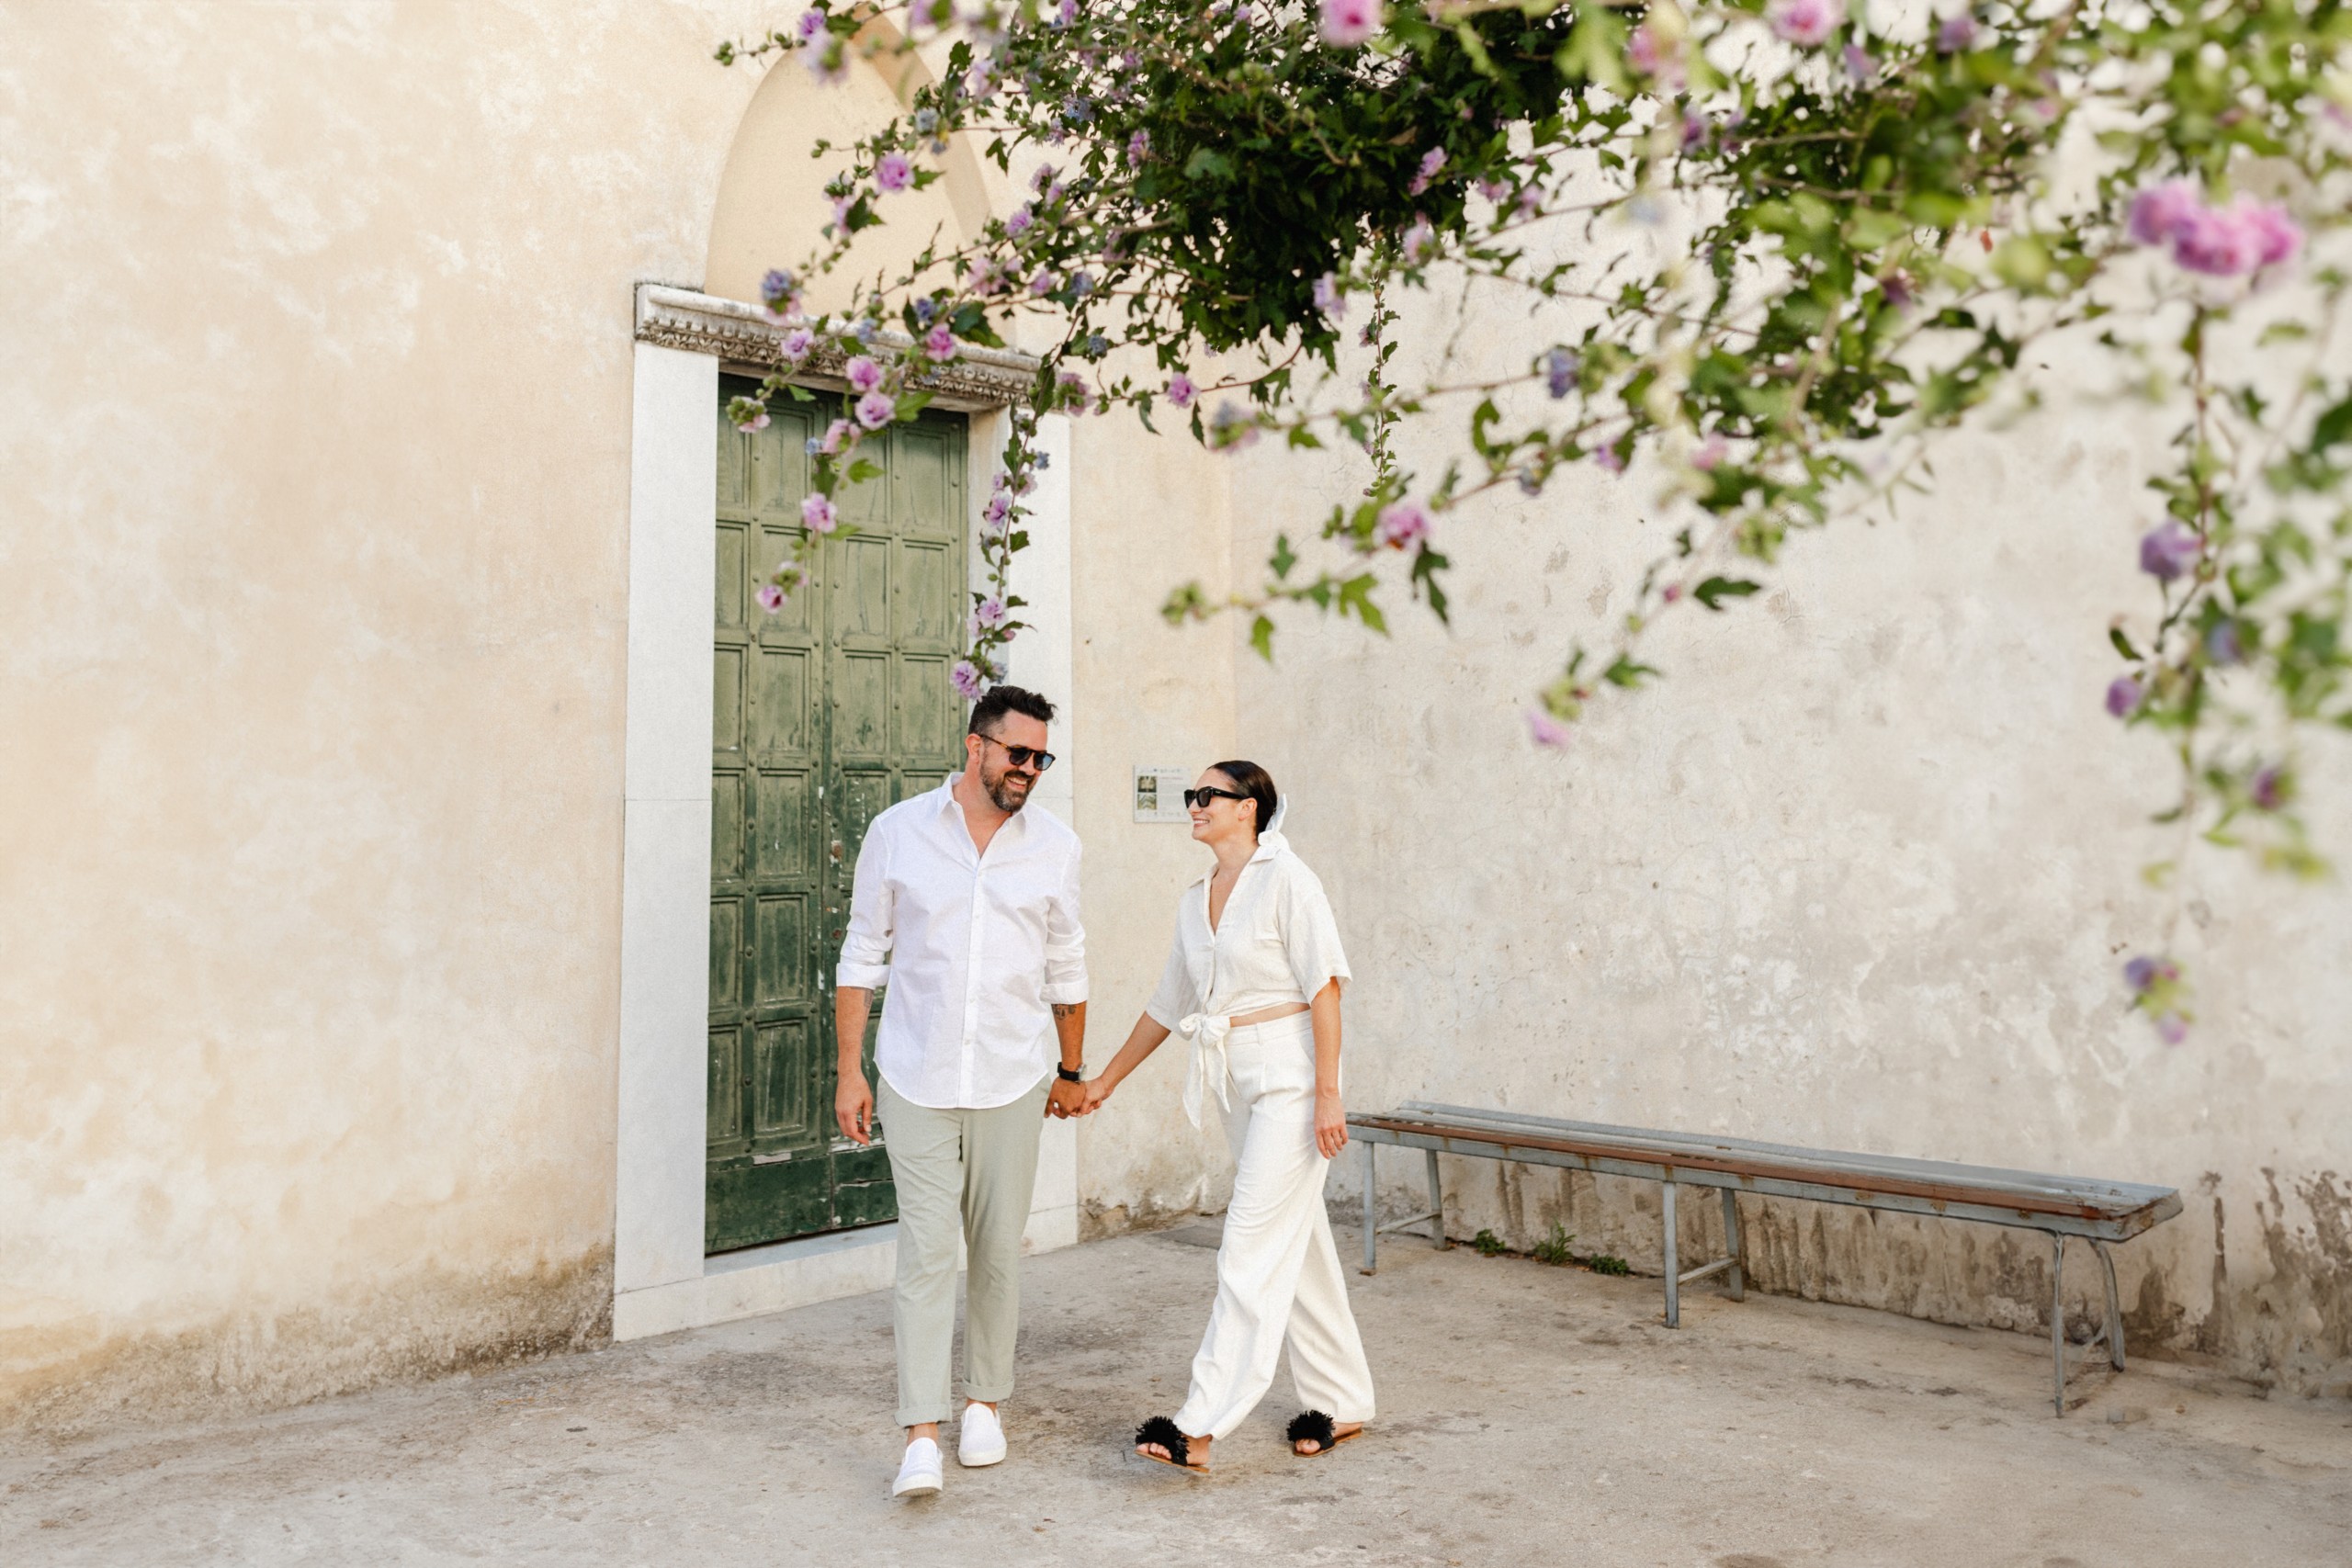 An engaged couple holding hands in front of an old building during their Italy engagement session.